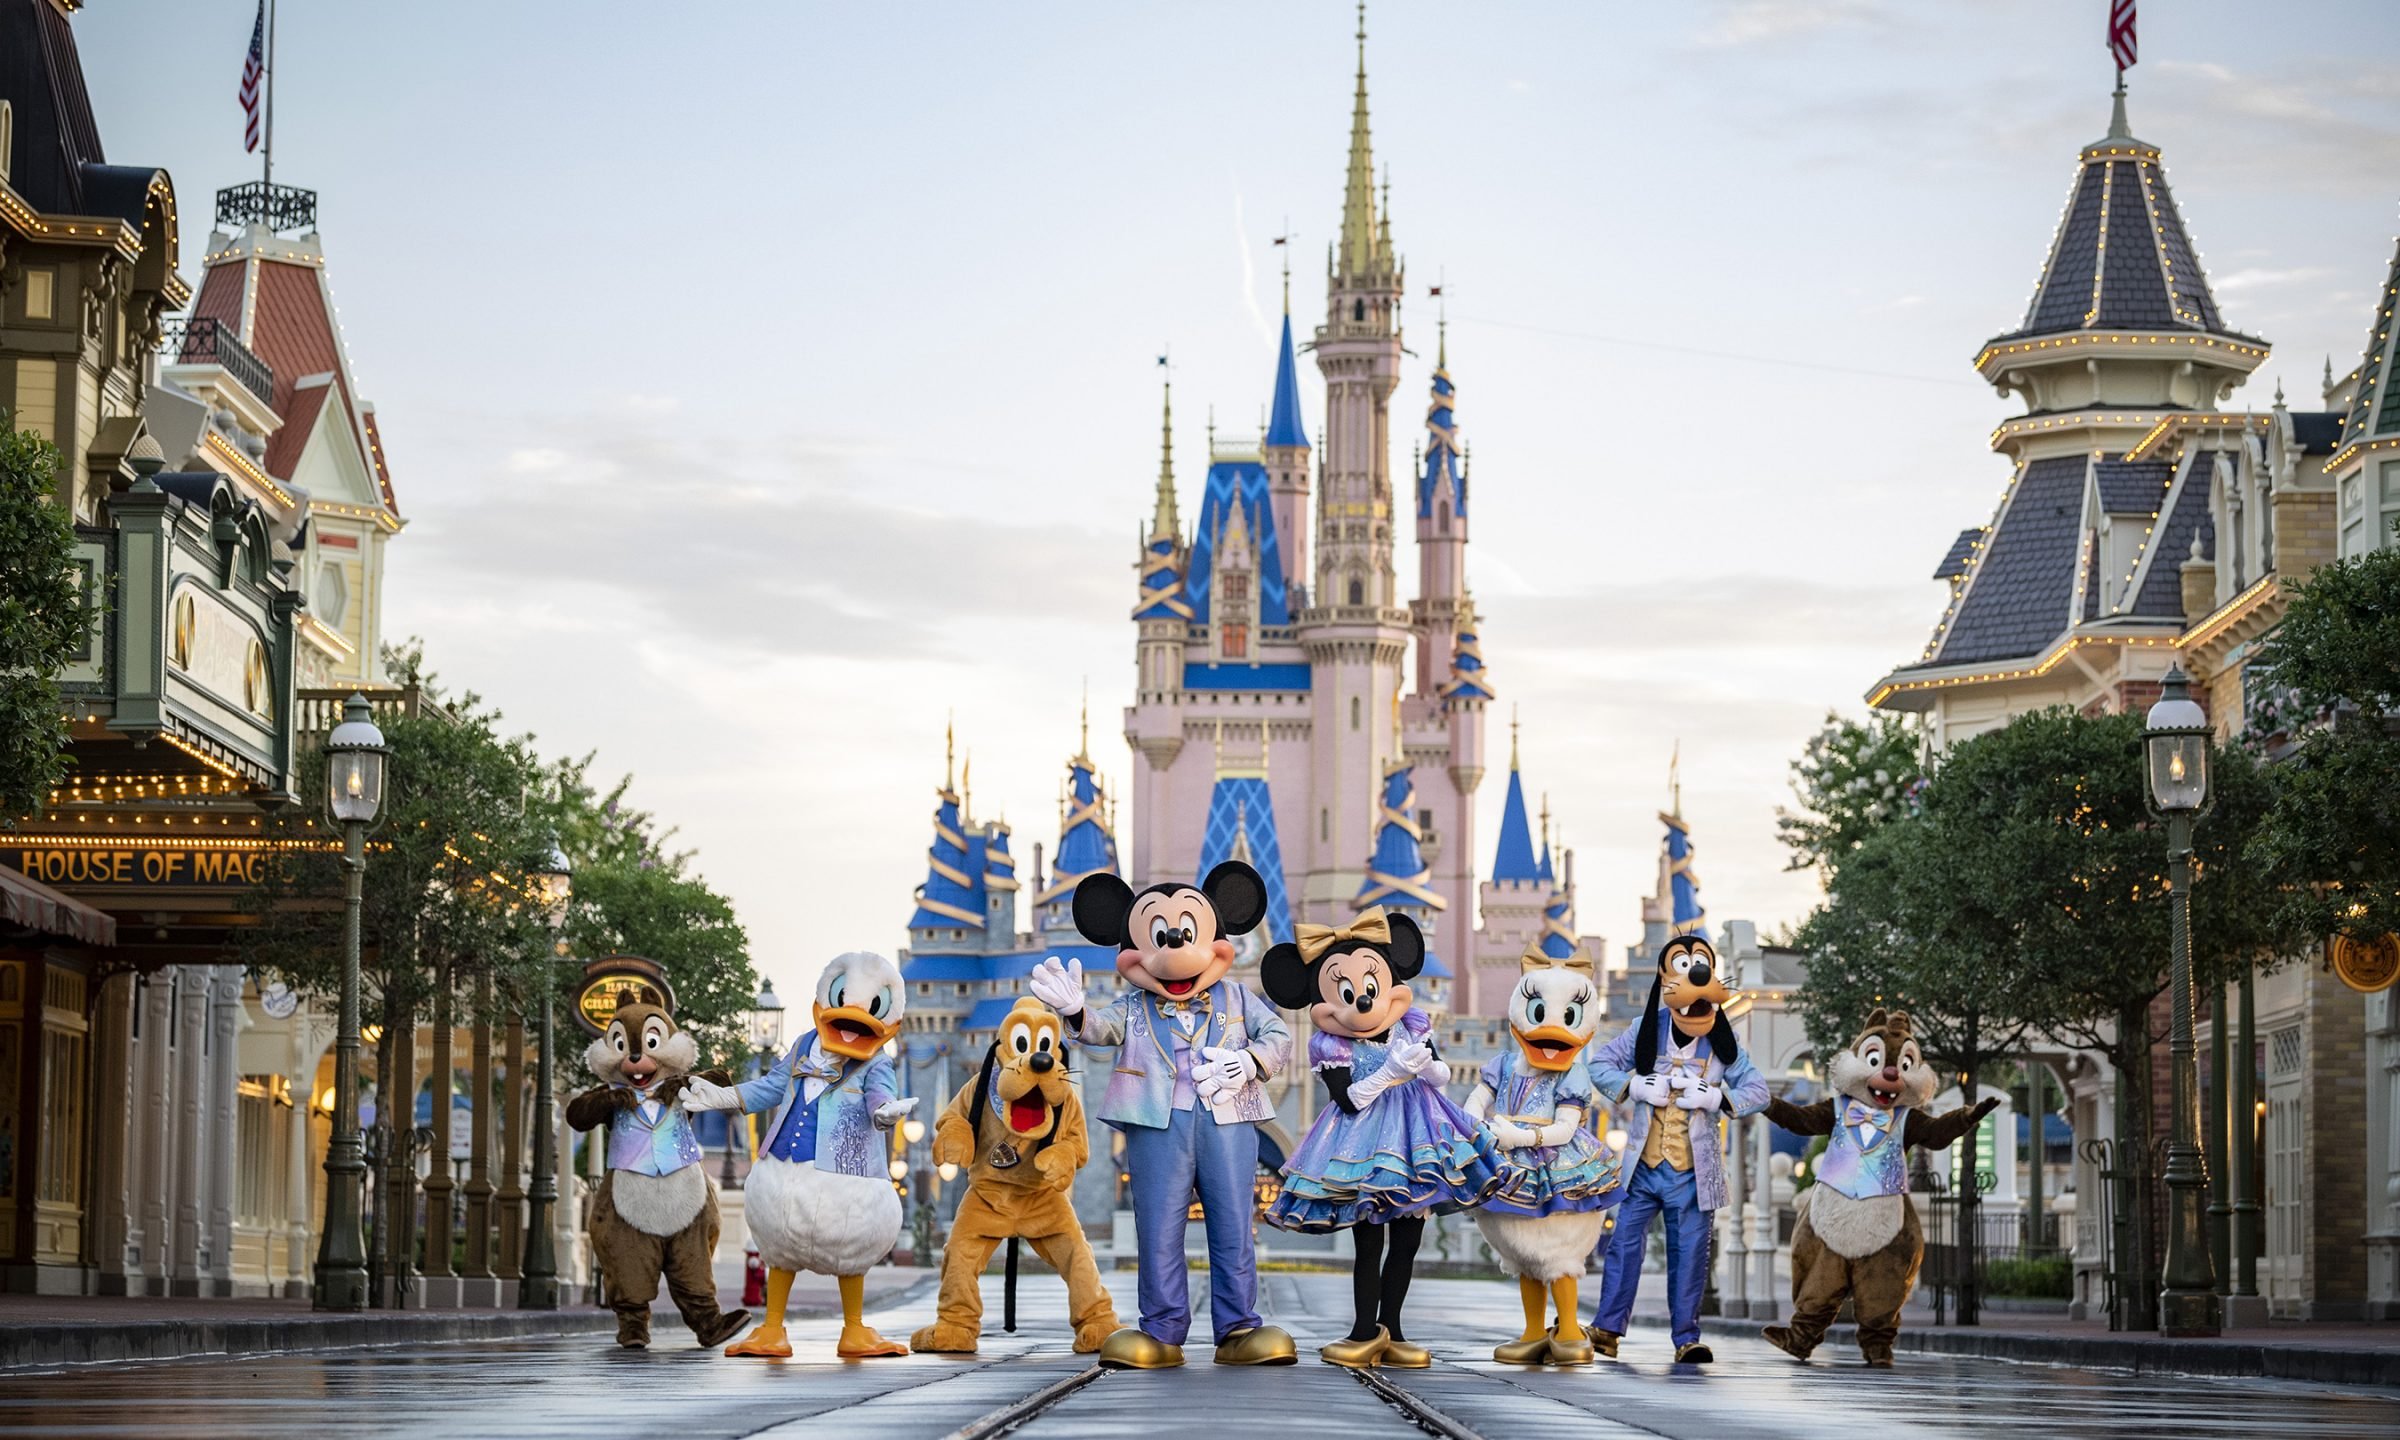 Our tips for visiting the Walt Disney World parks in Orlando